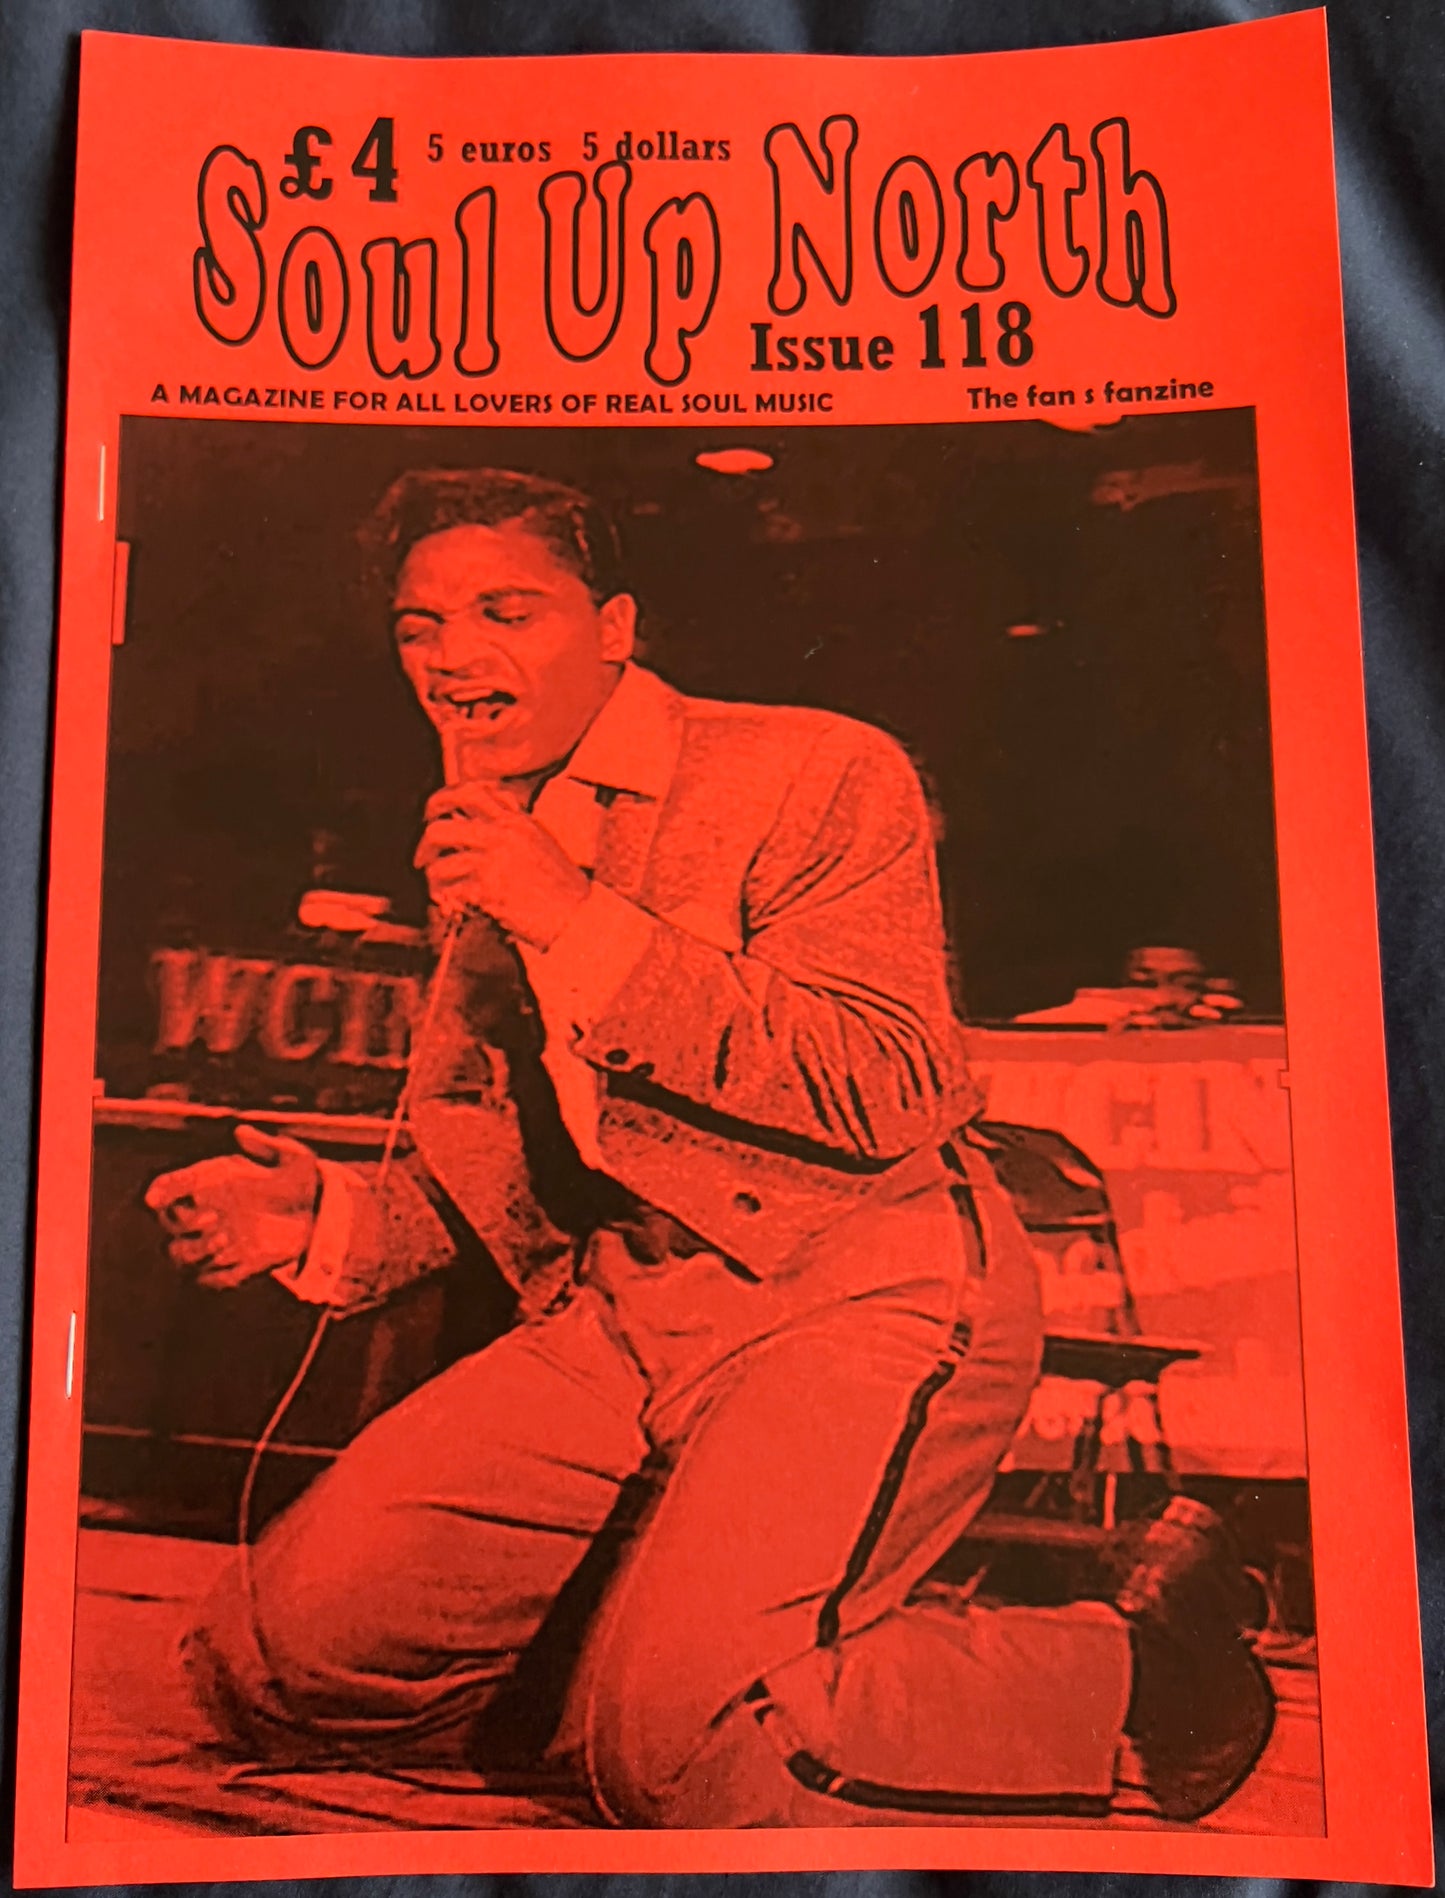 Soul Up North - Issue 118